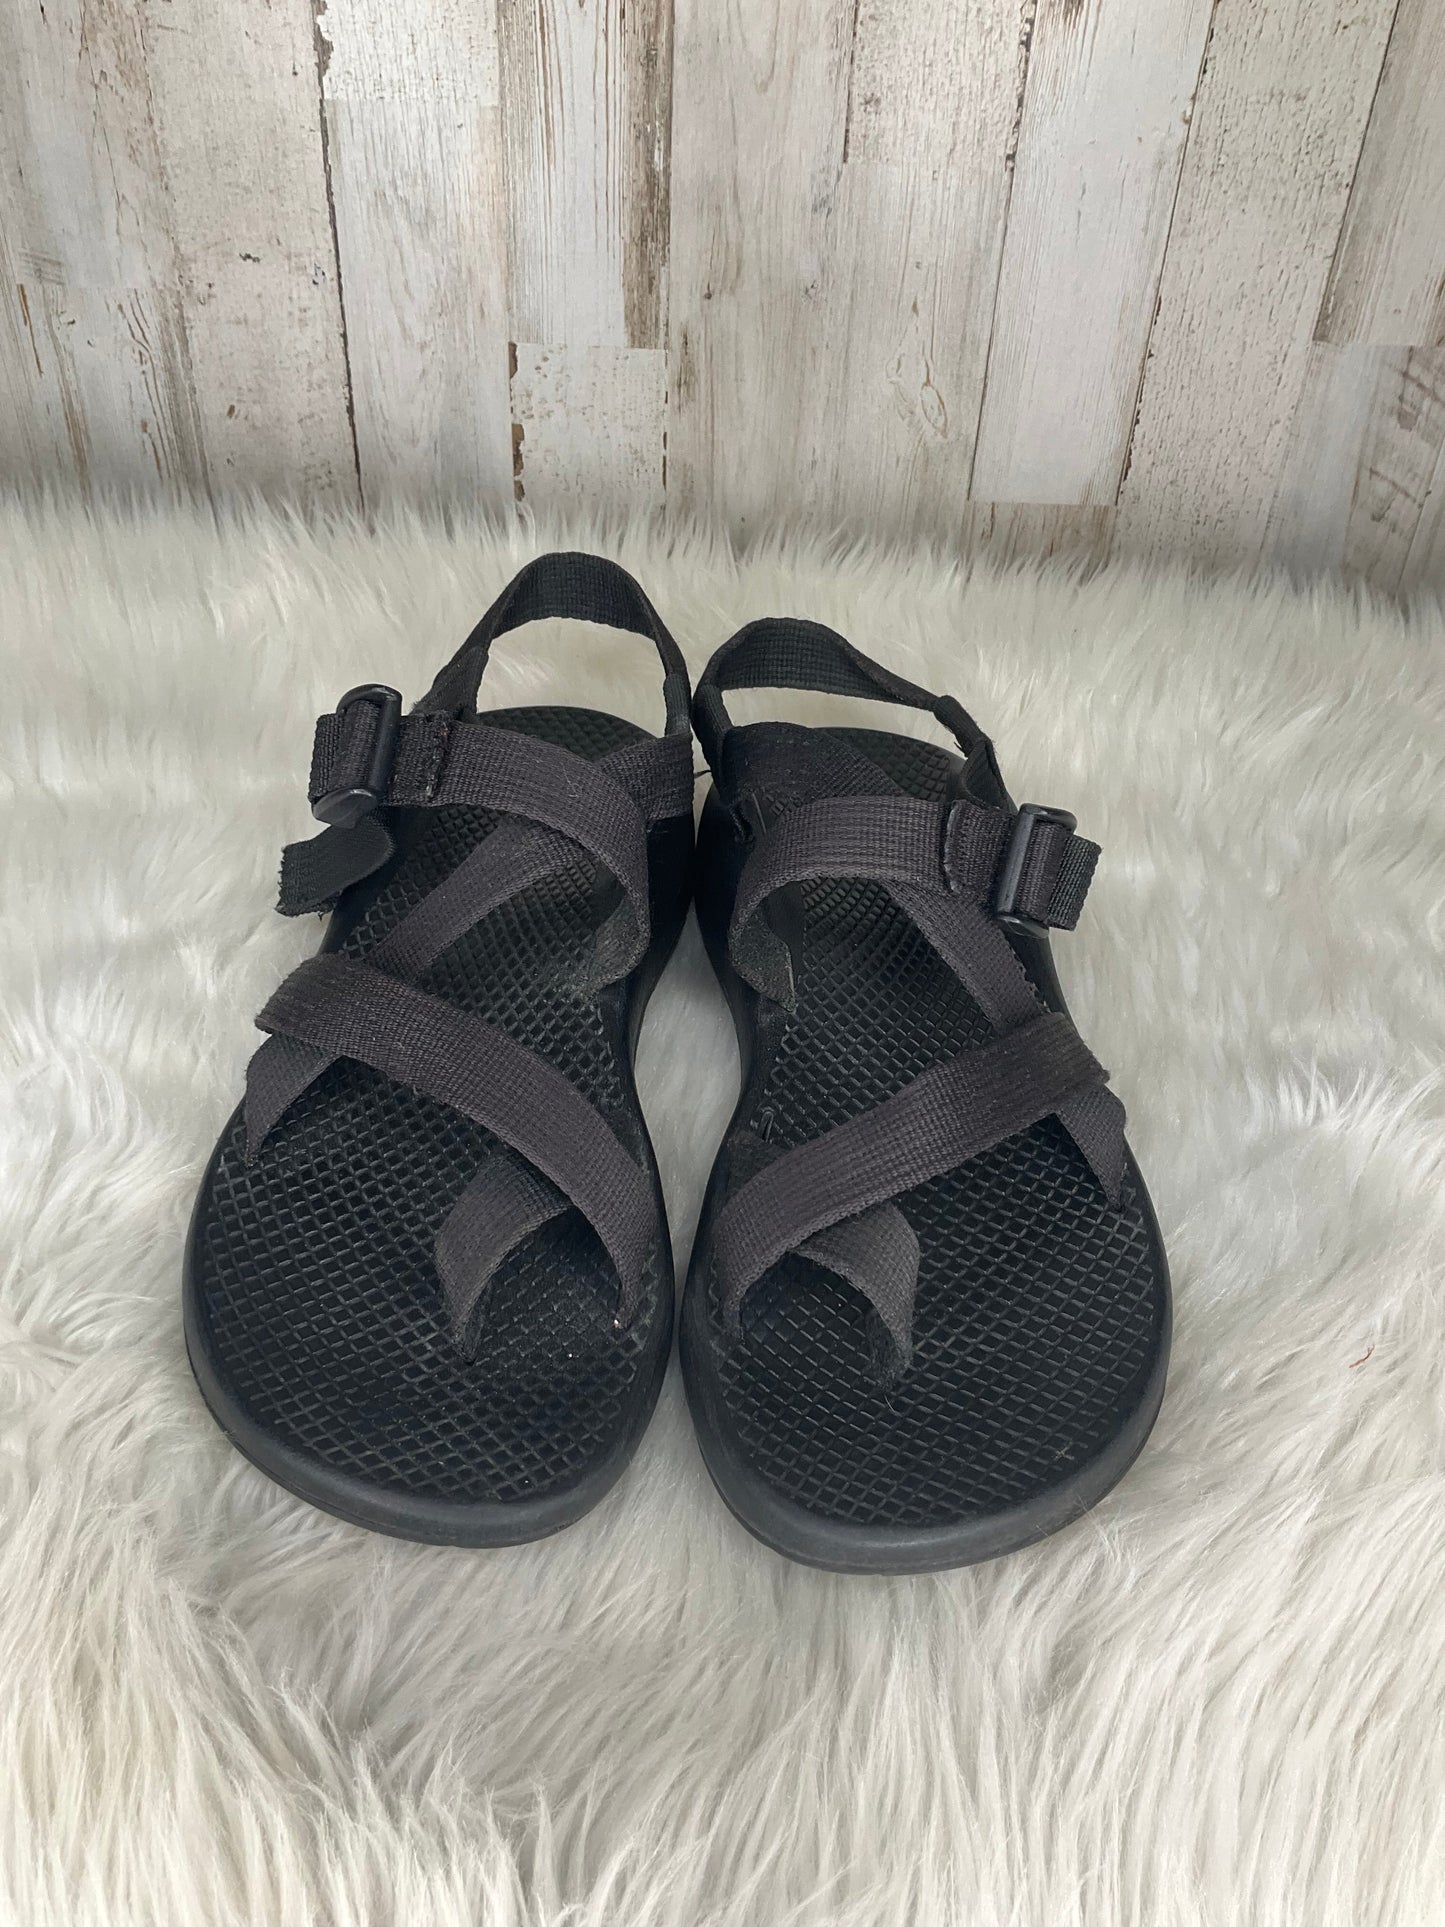 Black Sandals Sport Chacos, Size 7